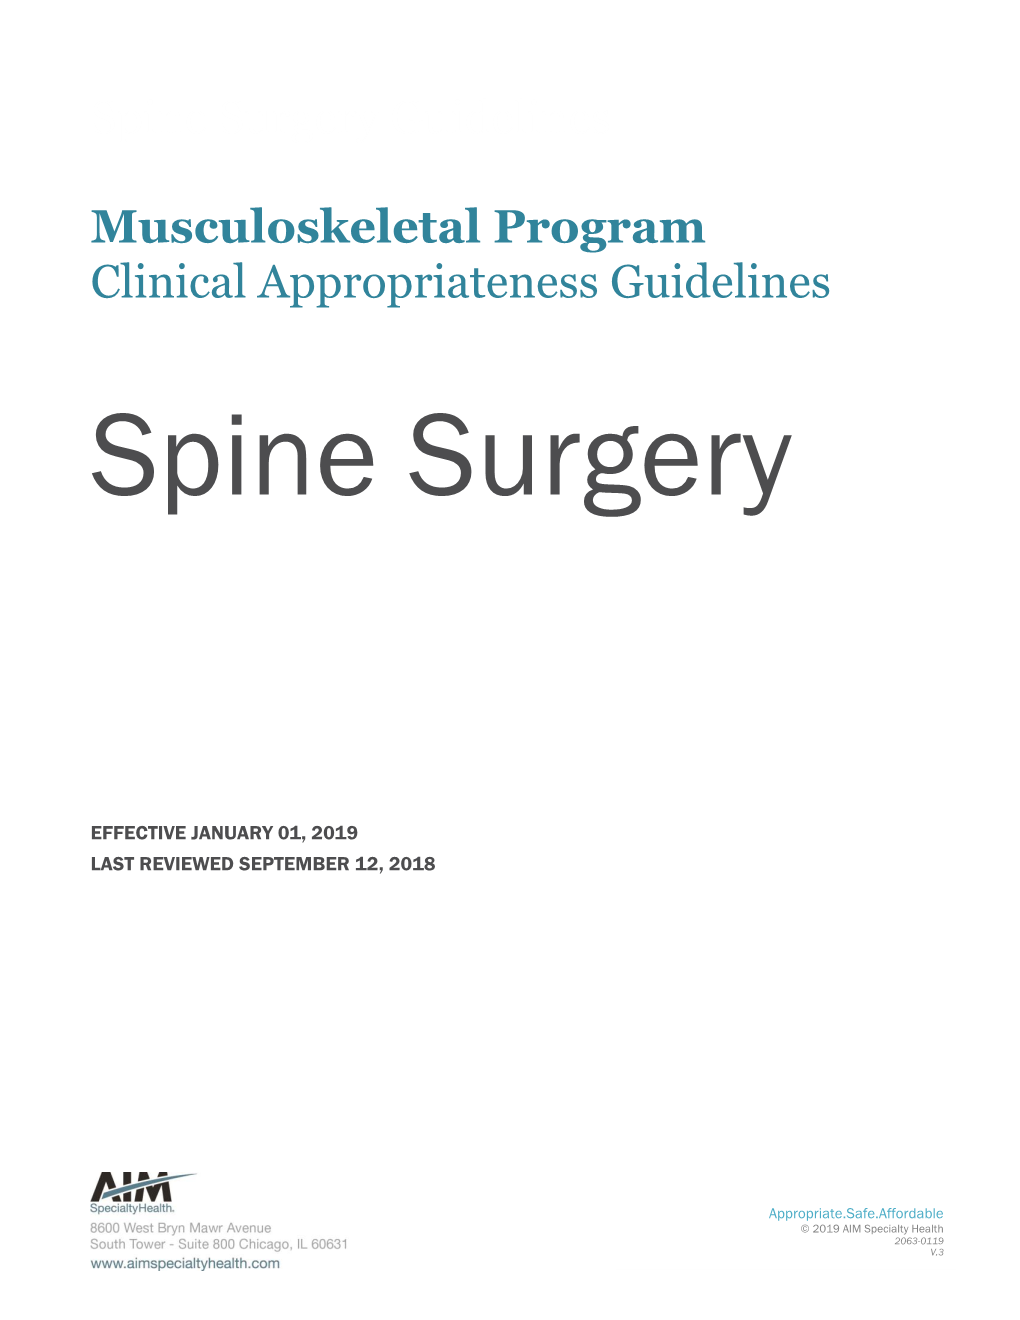 Spine Surgery Guidelines Musculoskeletal Program Clinical